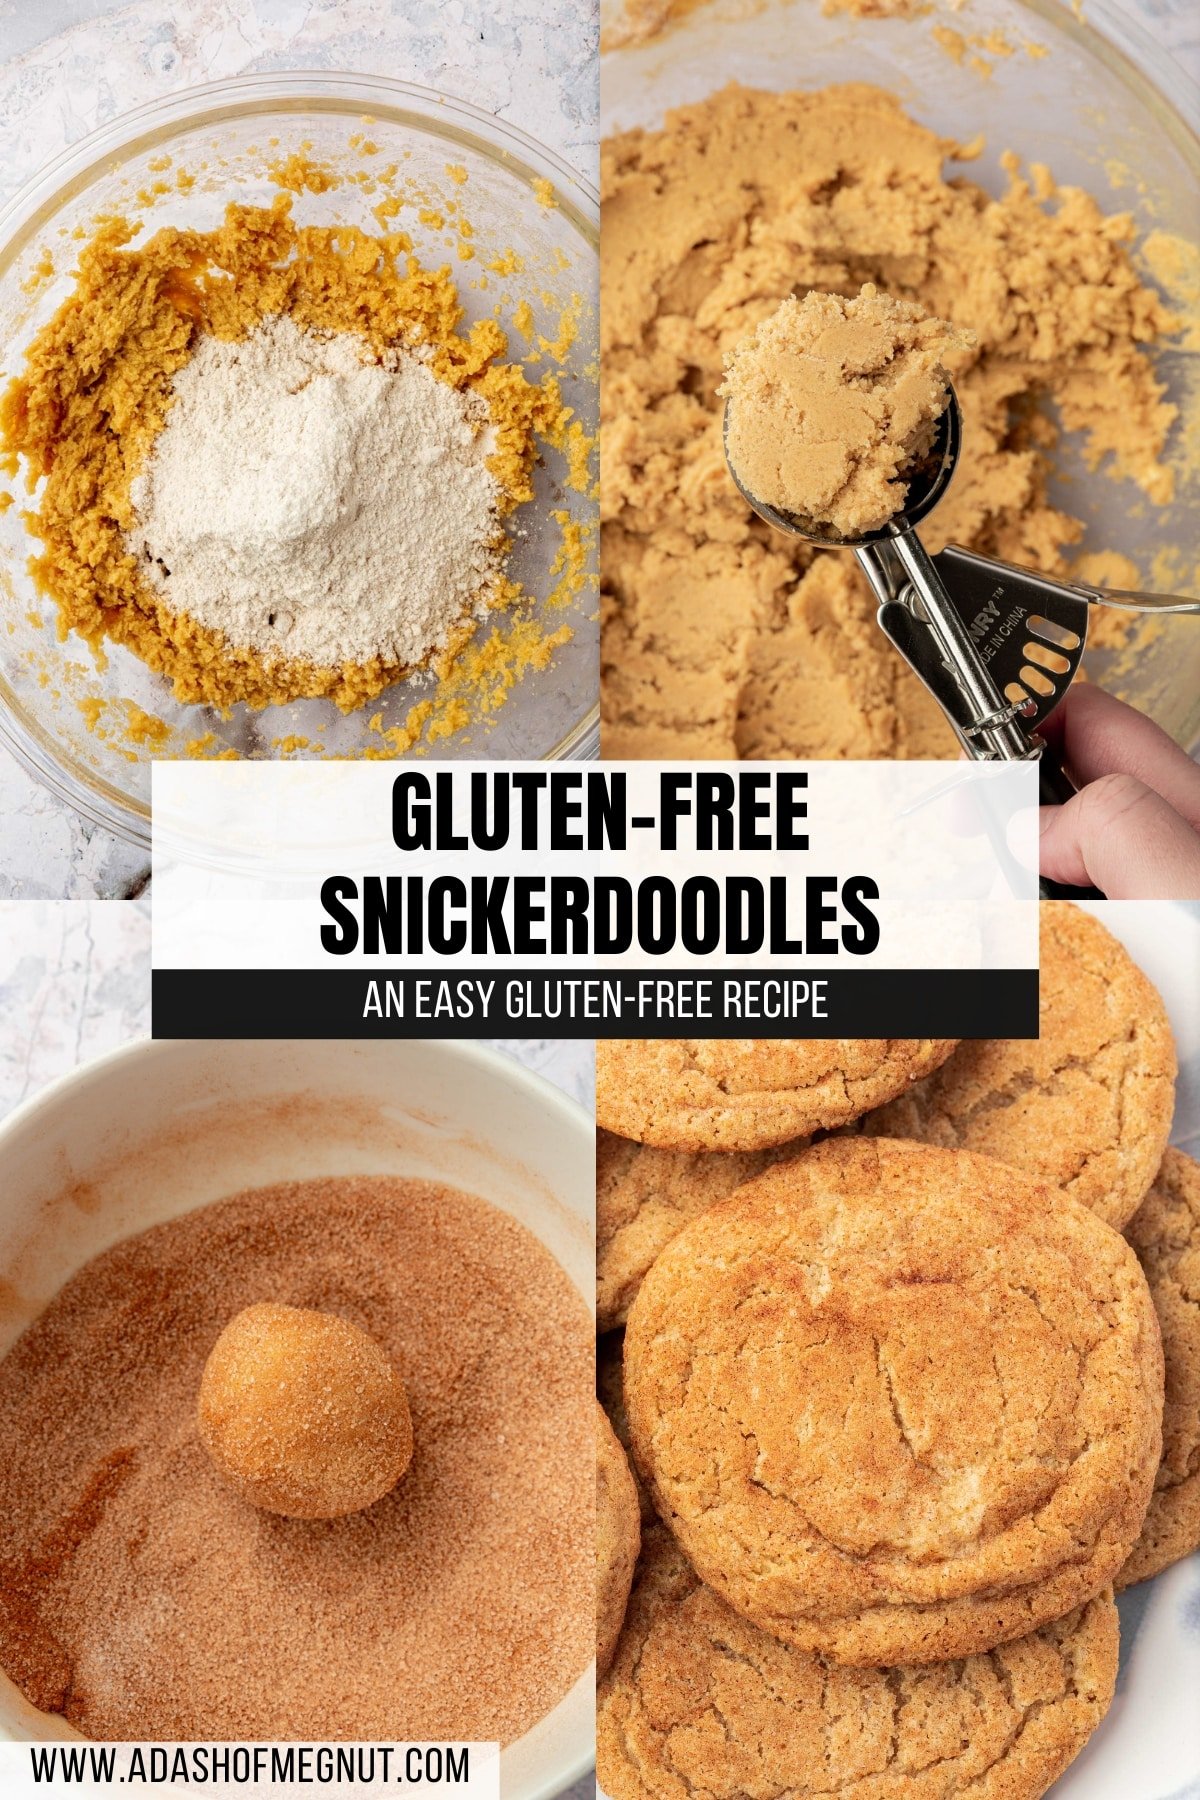 A four photo collage showing the process of making gluten-free snickerdoodles. Photo 1: Gluten-free flour on top of a butter and sugar mixture to make cookies in a glass mixing bowl. Photo 2: A cookie scoop with snickerdoodle cookie dough in it over a large bowl of gluten-free cookie dough. Photo 3: A gluten-free snickerdoodle cookie dough ball rolled in a bowl of cinnamon sugar. Photo 4: A closeup of a plate of gluten-free snickerdoodles on it.